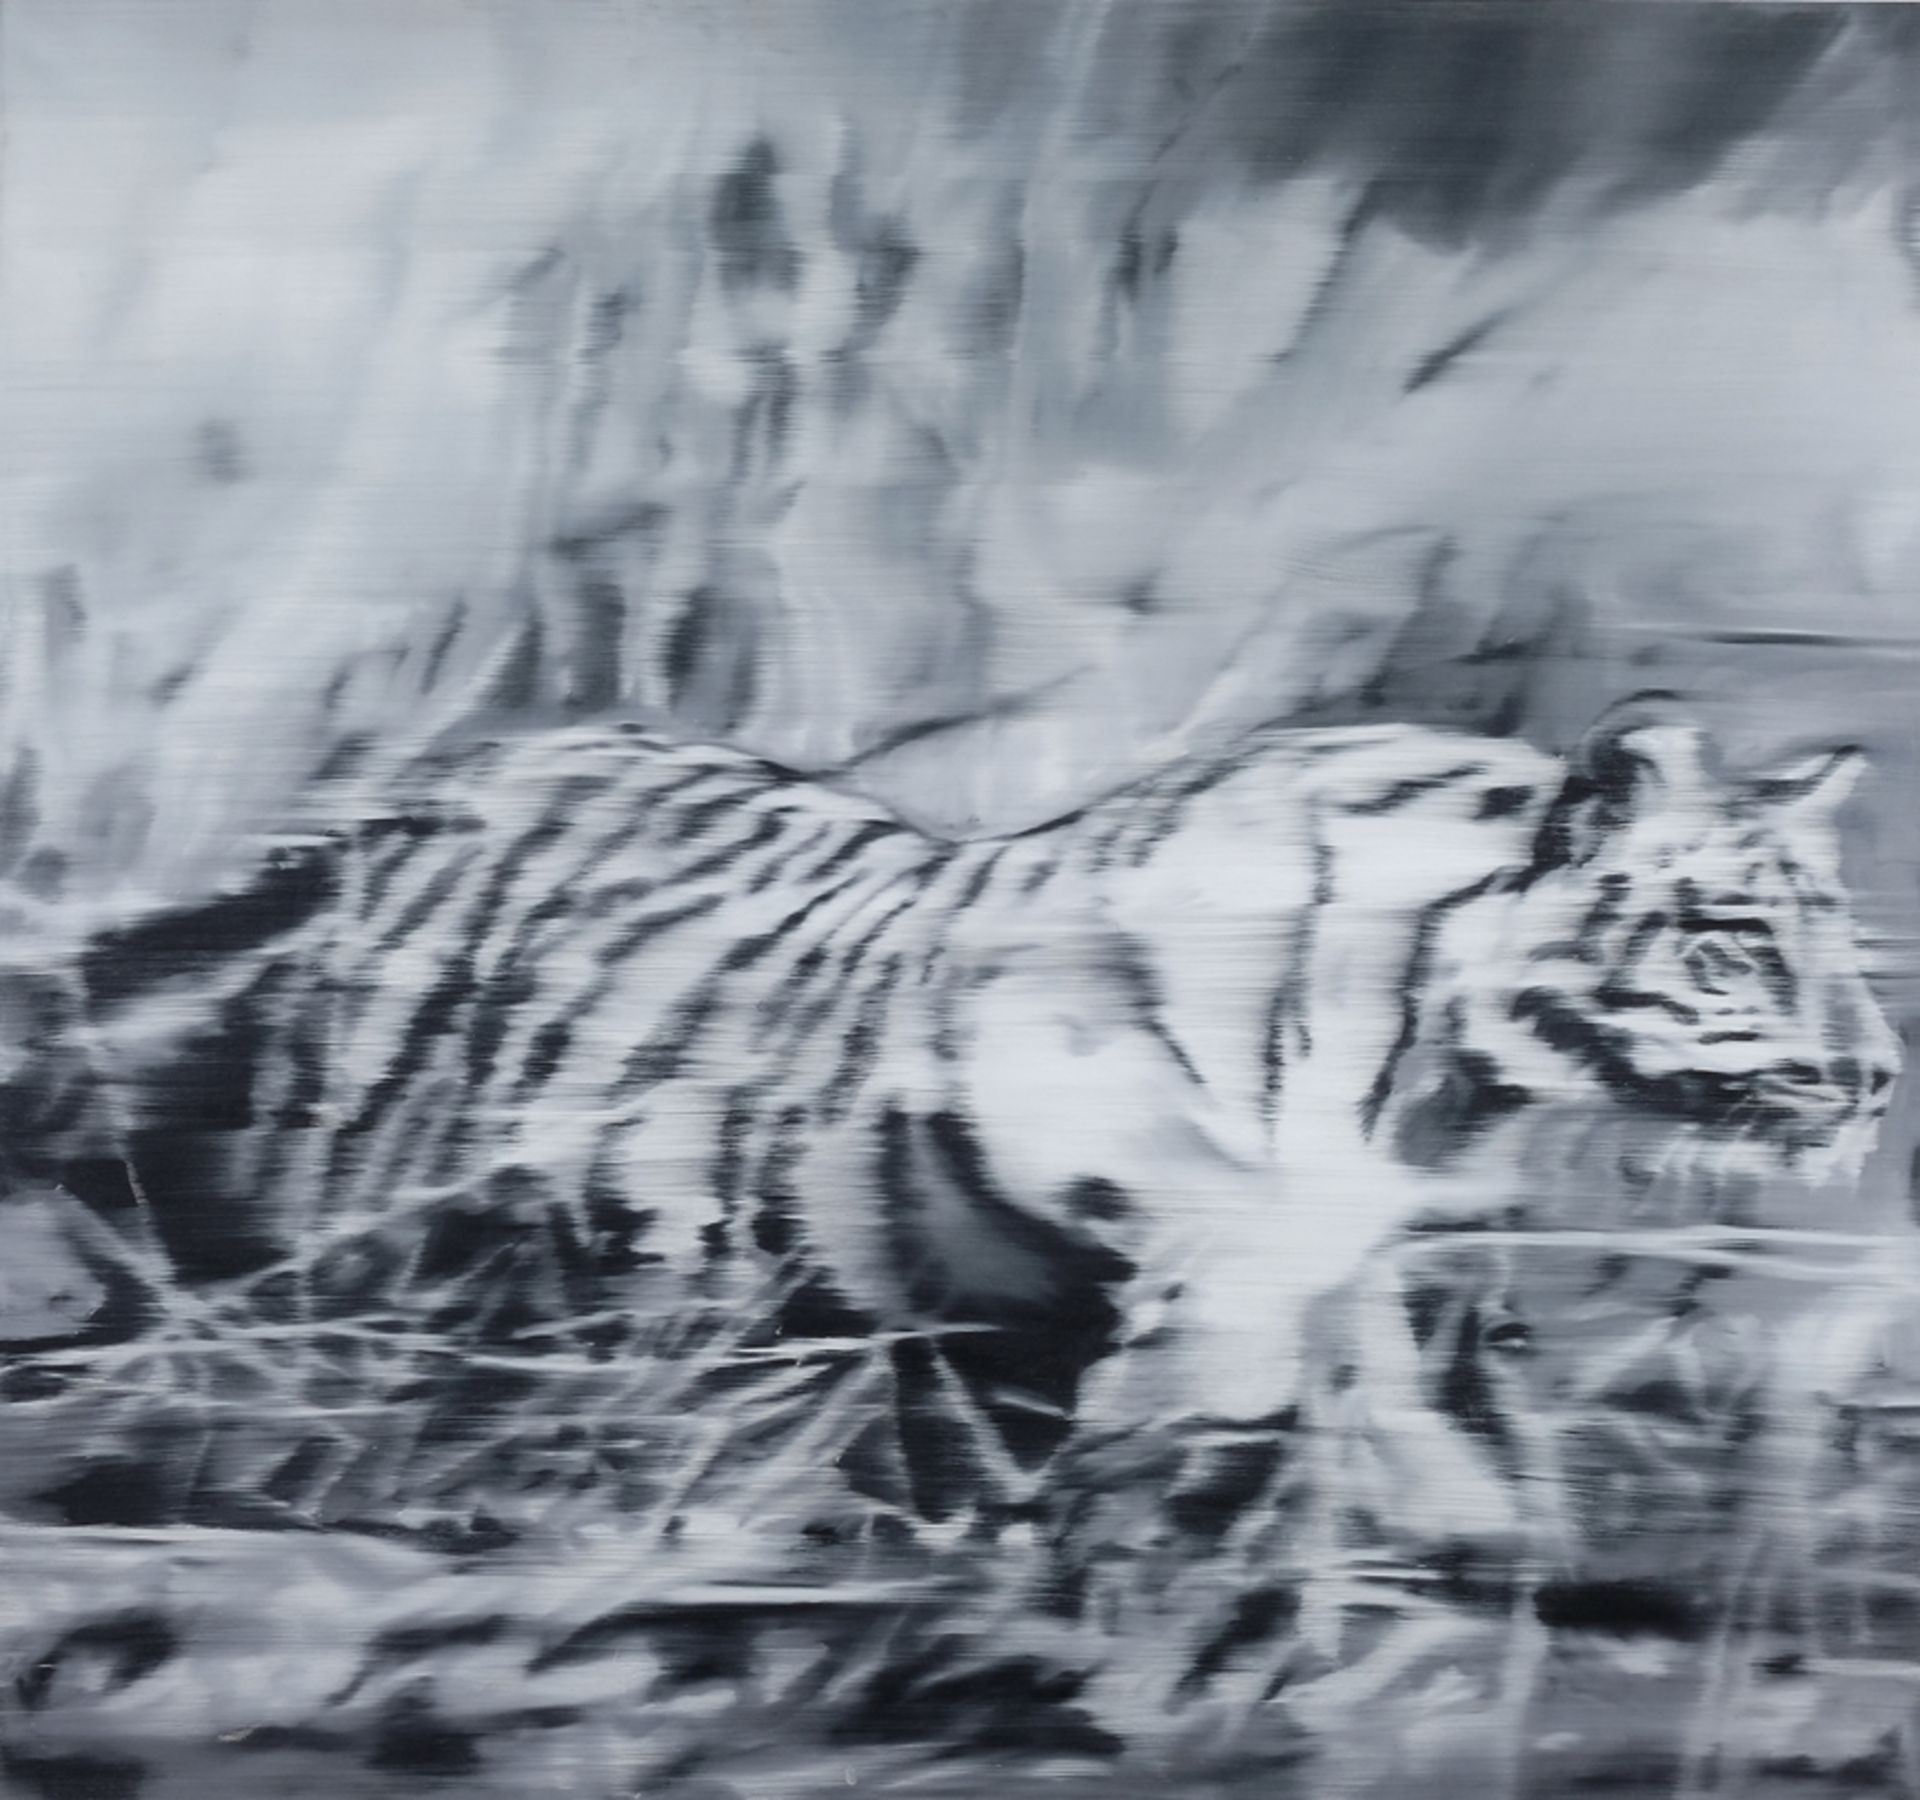 Richter, Gerhard (born 1932) Tiger, after the painting from 1965, offset print on scooped paper. 